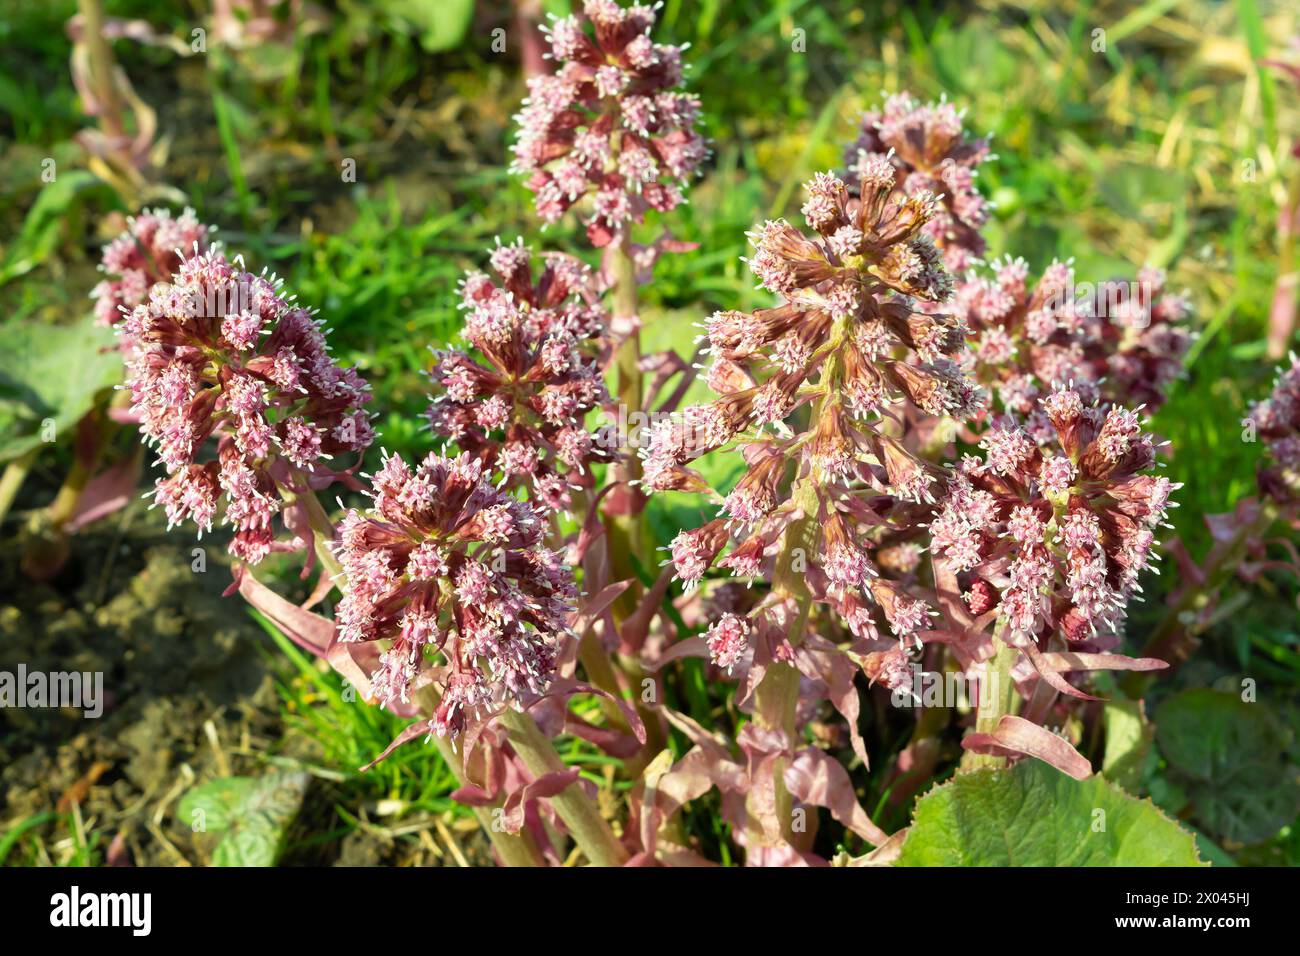 Pink Petasites flowers, close-up. butterburs, coltsfoots, family Asteraceae. Plants and flowers. Stock Photo